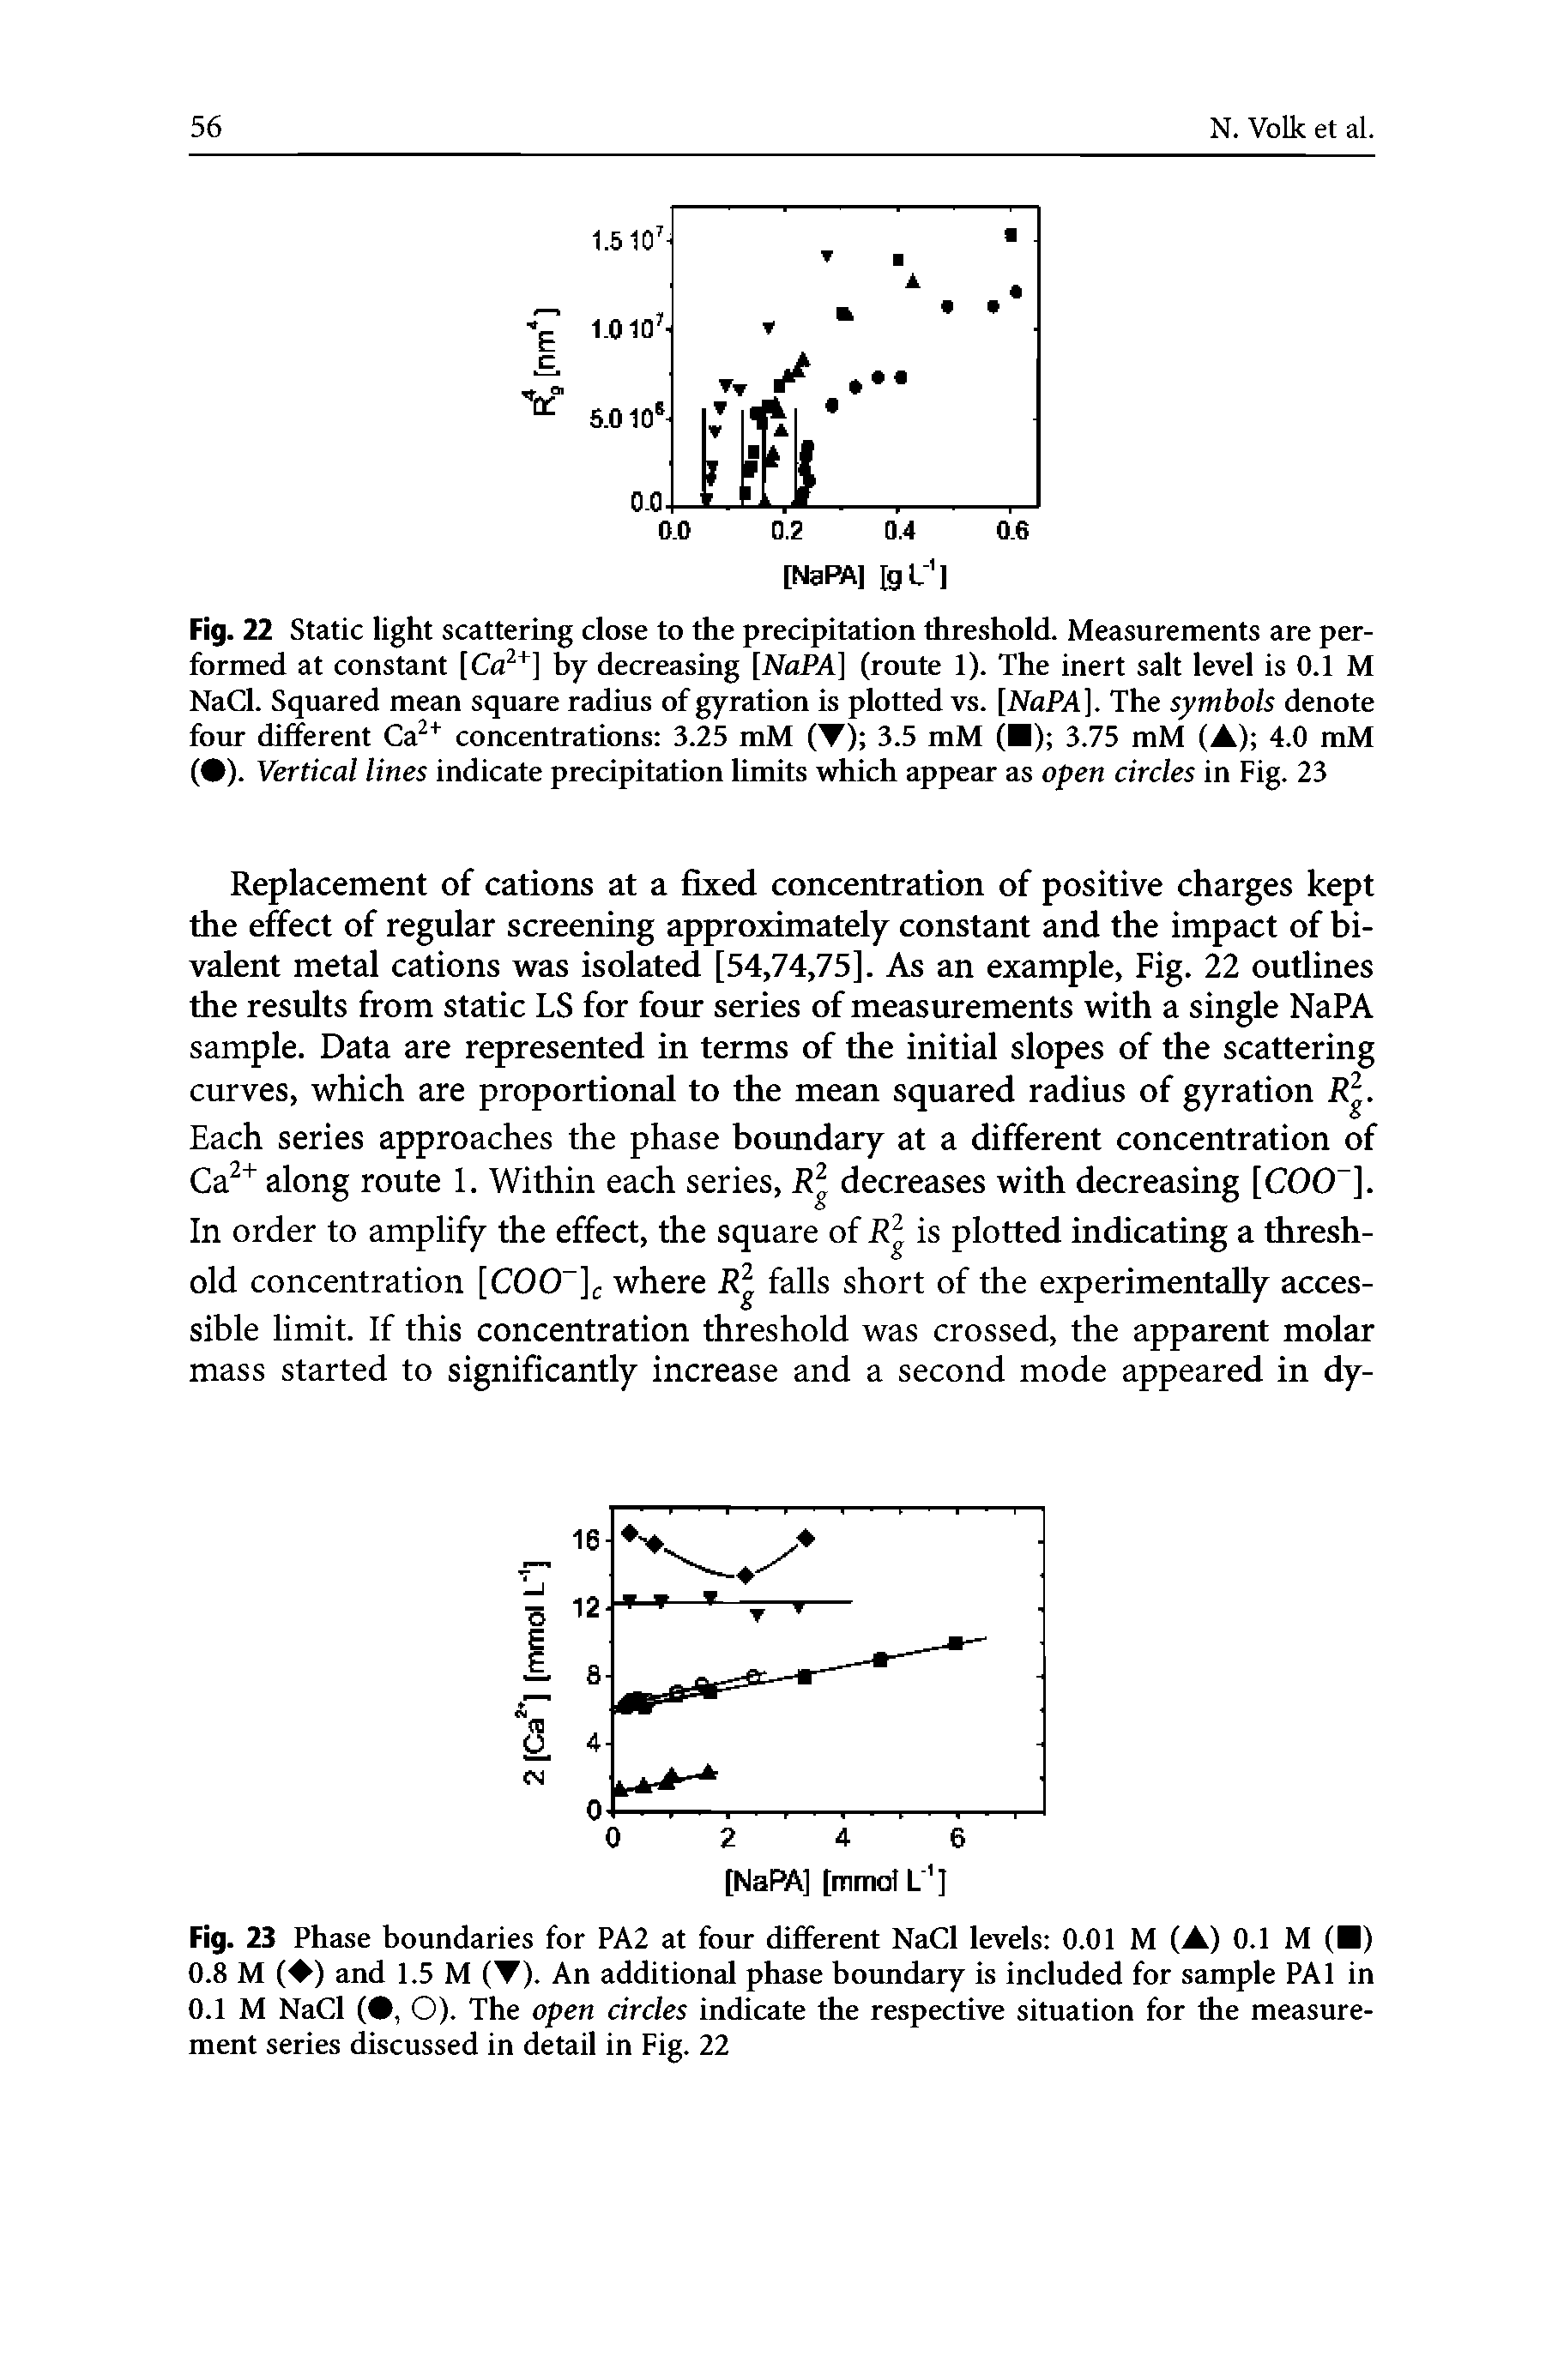 Fig. 22 Static light scattering close to the precipitation threshold. Measurements are performed at constant [Ca2+] by decreasing [NaPA] (route 1). The inert salt level is 0.1 M NaCl. Squared mean square radius of gyration is plotted vs. [NaPA], The symbols denote four different Ca2+ concentrations 3.25 mM ( ) 3.5 mM ( ) 3.75 mM (A) 4.0 mM ( ). Vertical lines indicate precipitation limits which appear as open circles in Fig. 23...